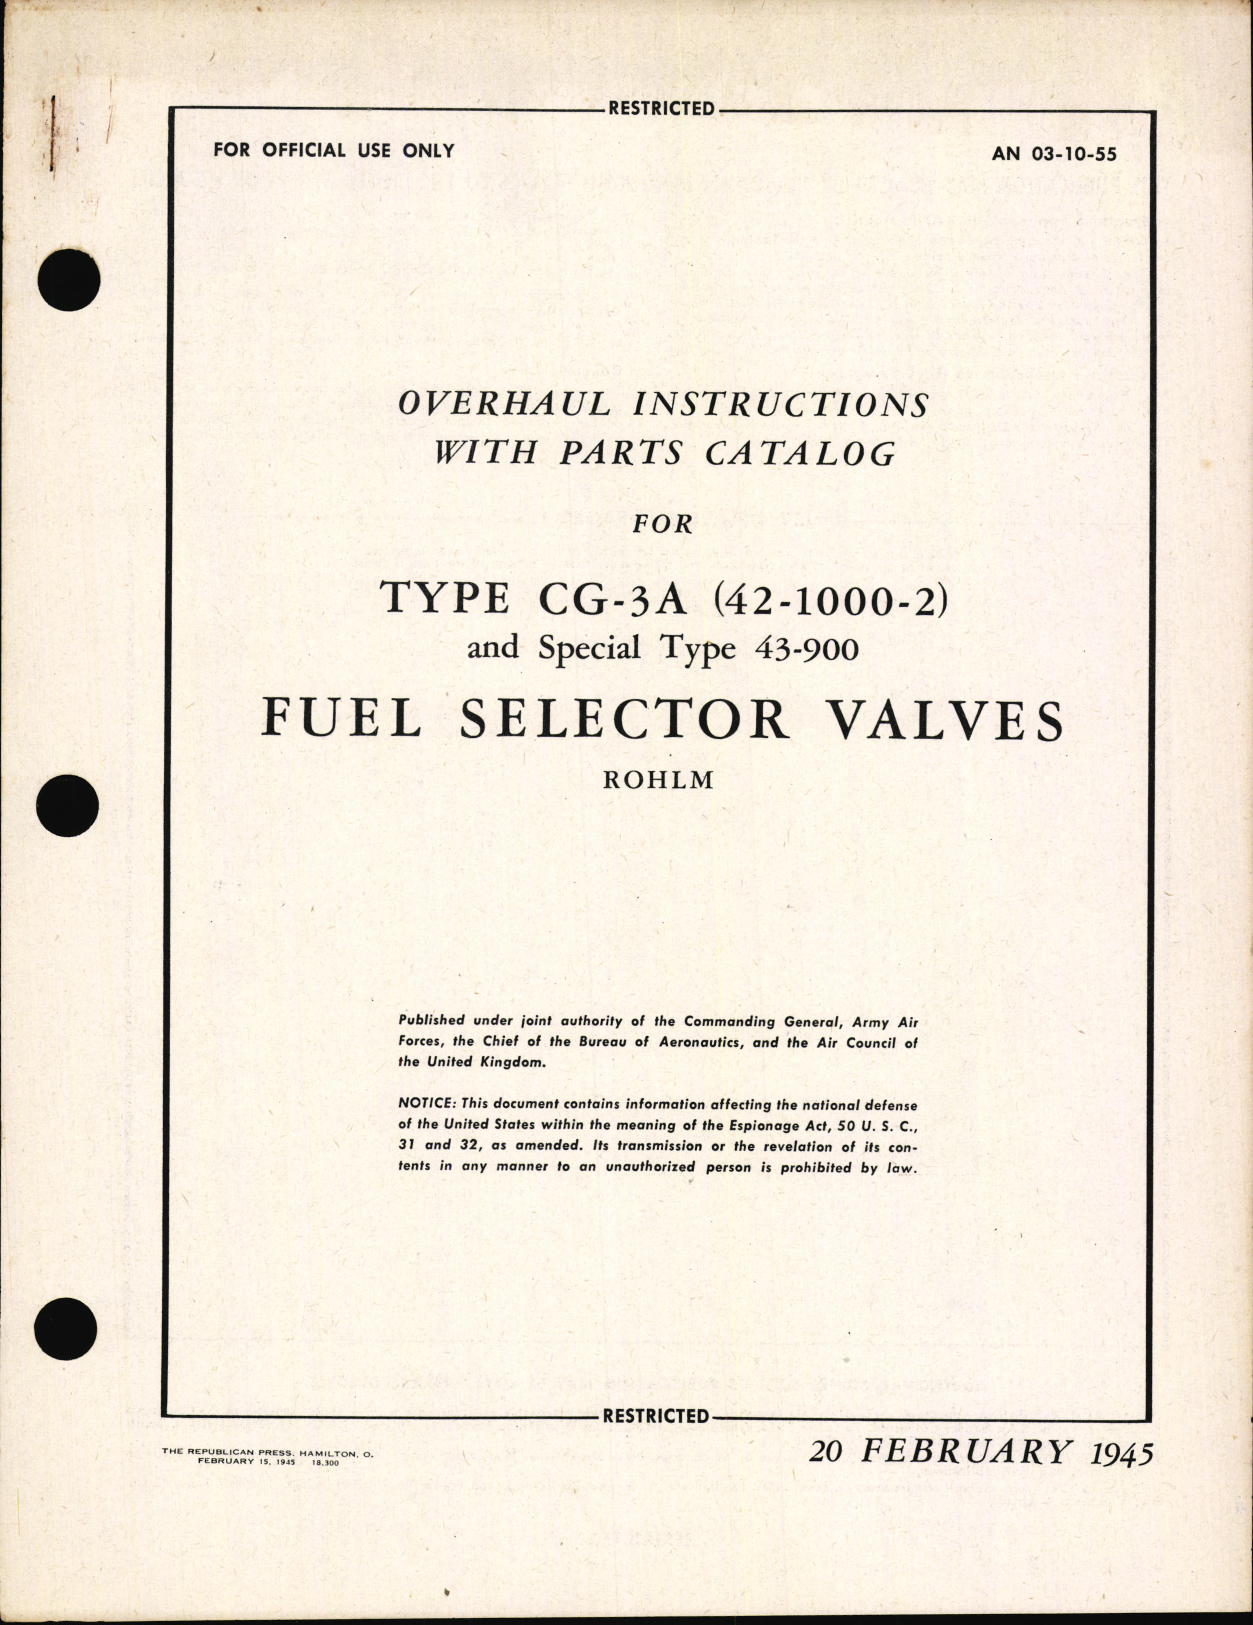 Sample page 1 from AirCorps Library document: Overhaul Instructions with Parts Catalog for Type CG-3A (42-1000-2) and Special Type 43-900 Fuel Selector Valves